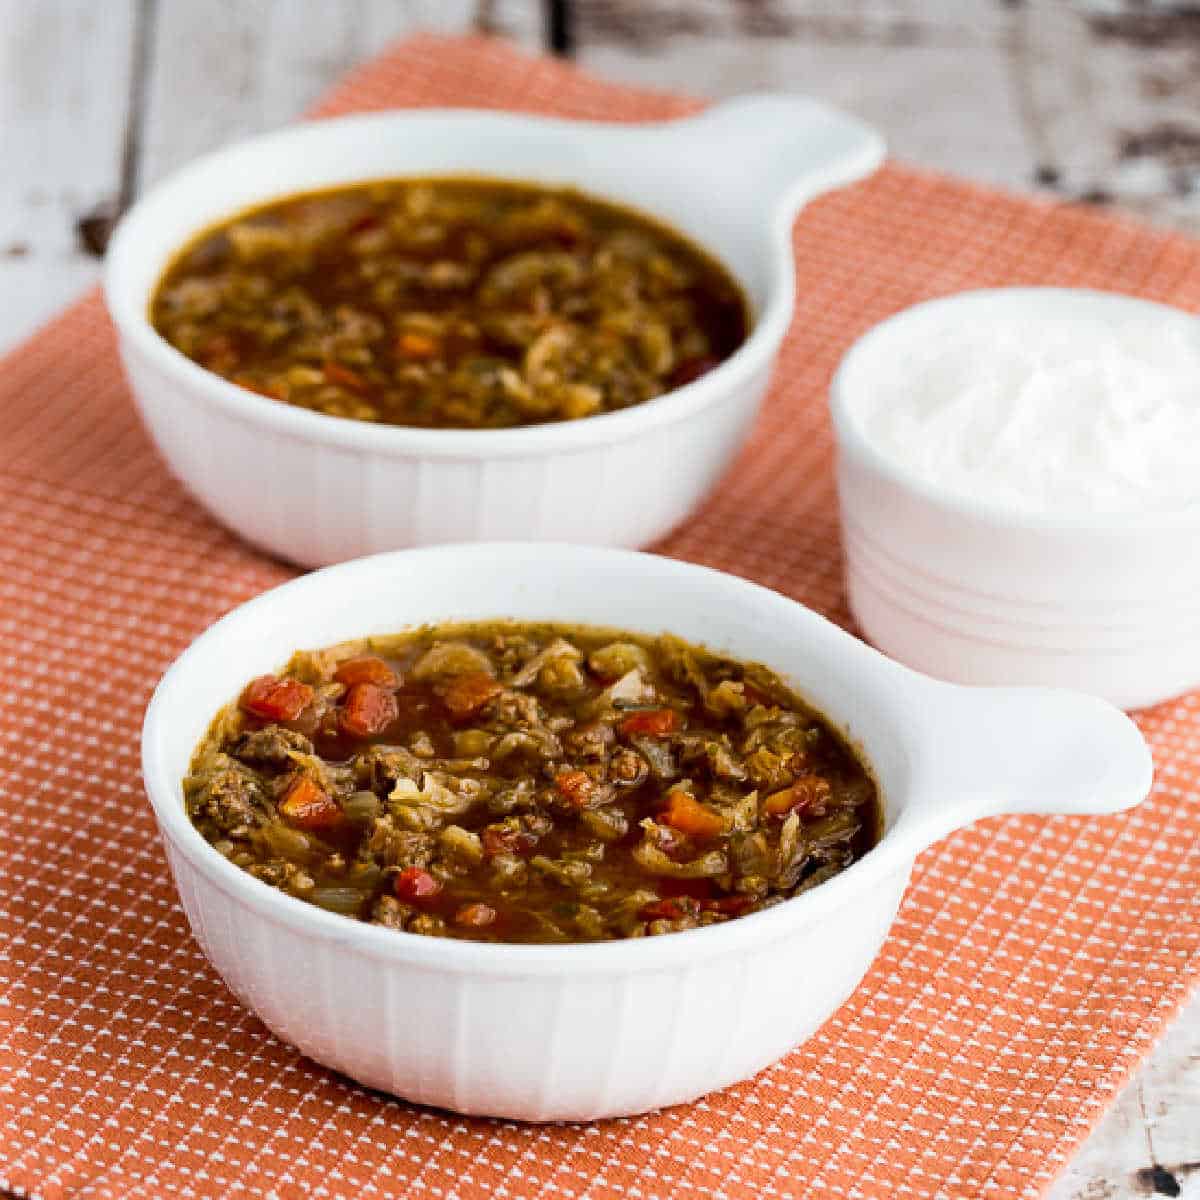 Ground Beef and Sauerkraut Soup shown in two serving bowls with sour cream on the side